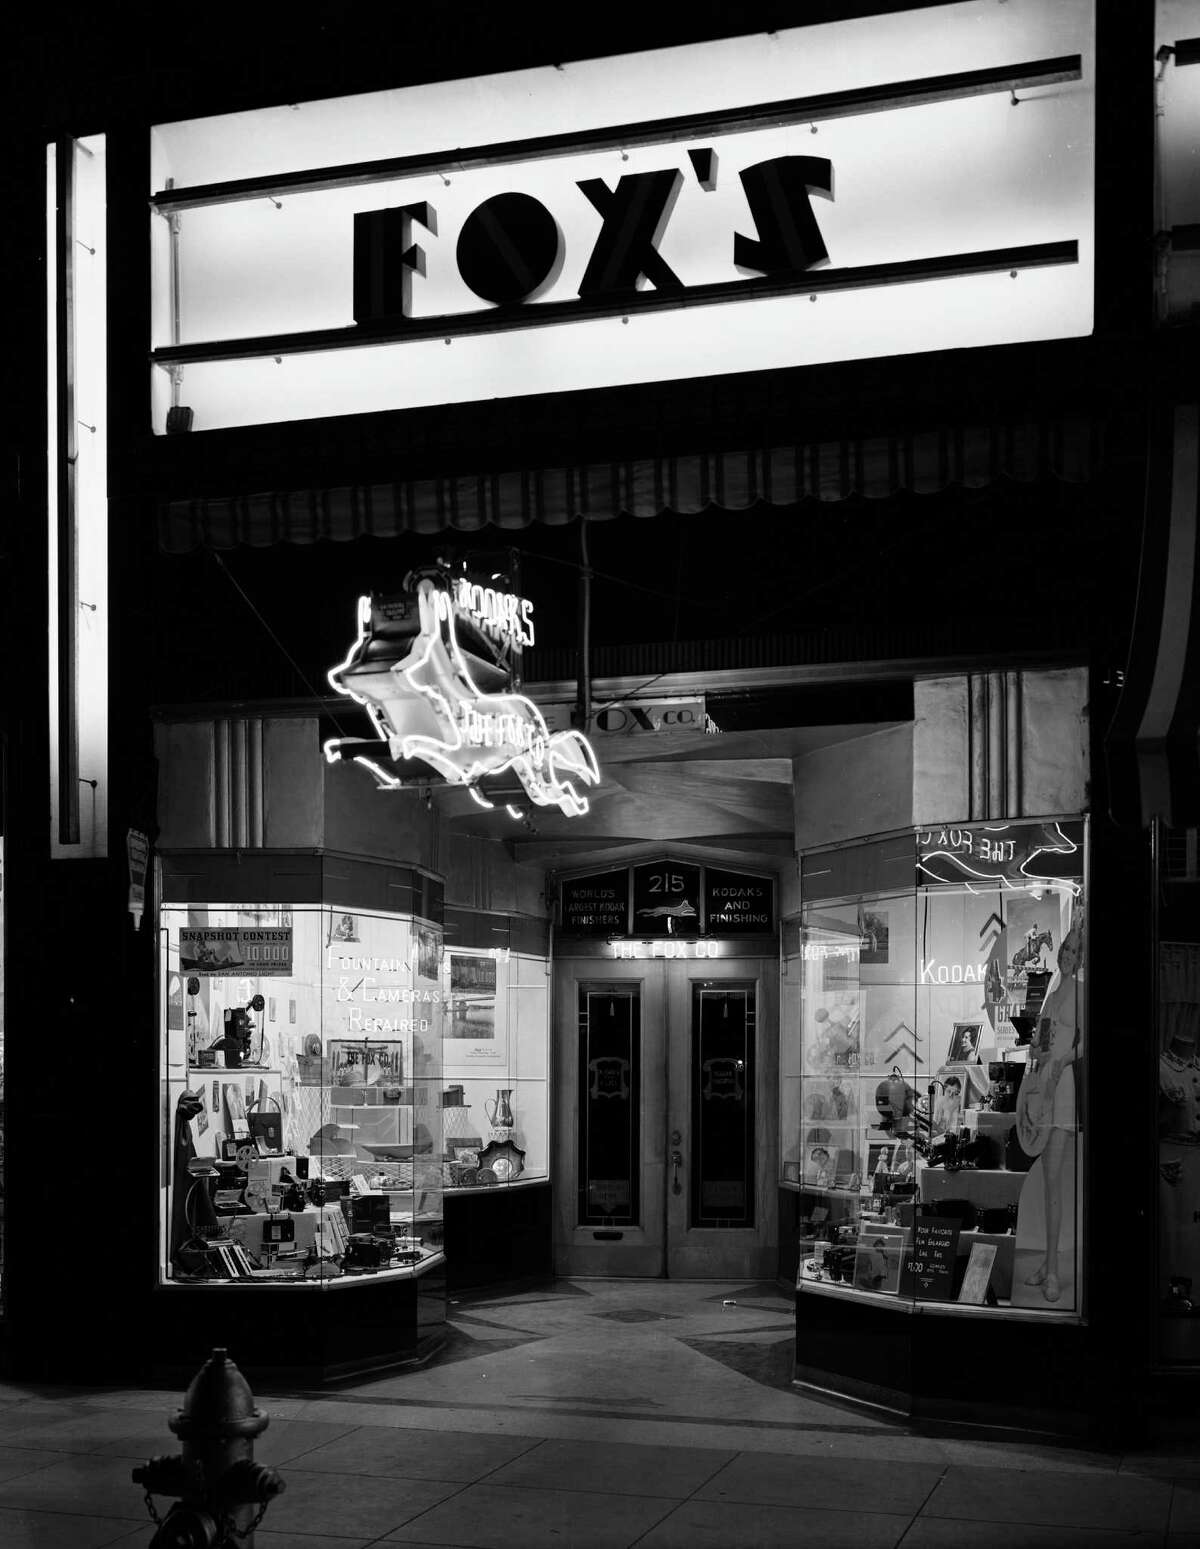 One of the original Fox Photo stores, taken in the 1930s or ?’40s.